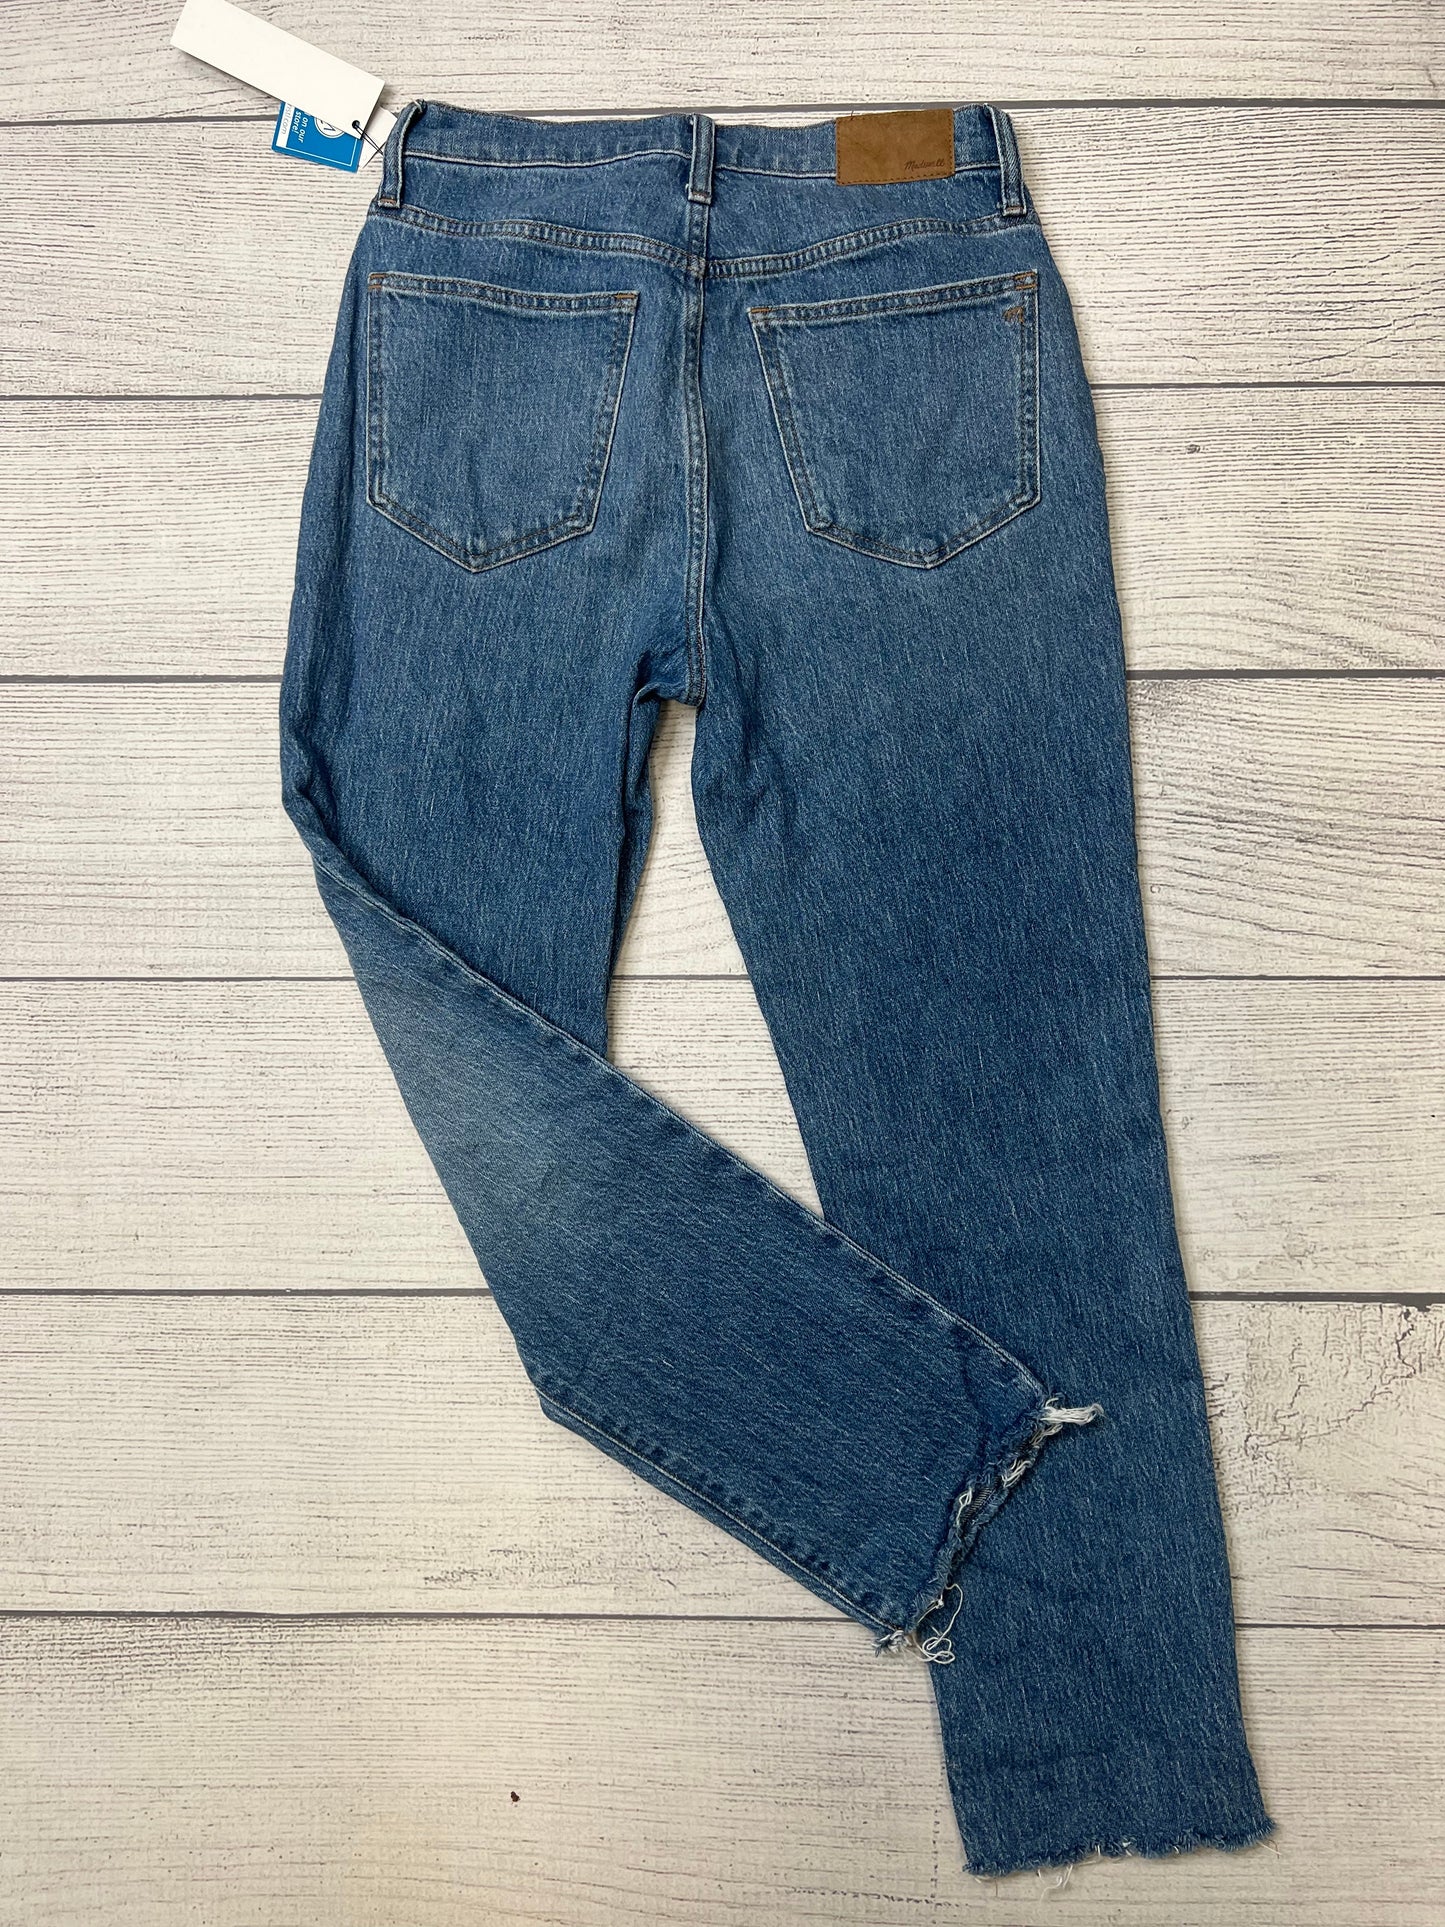 Jeans Designer By Madewell  Size: 2